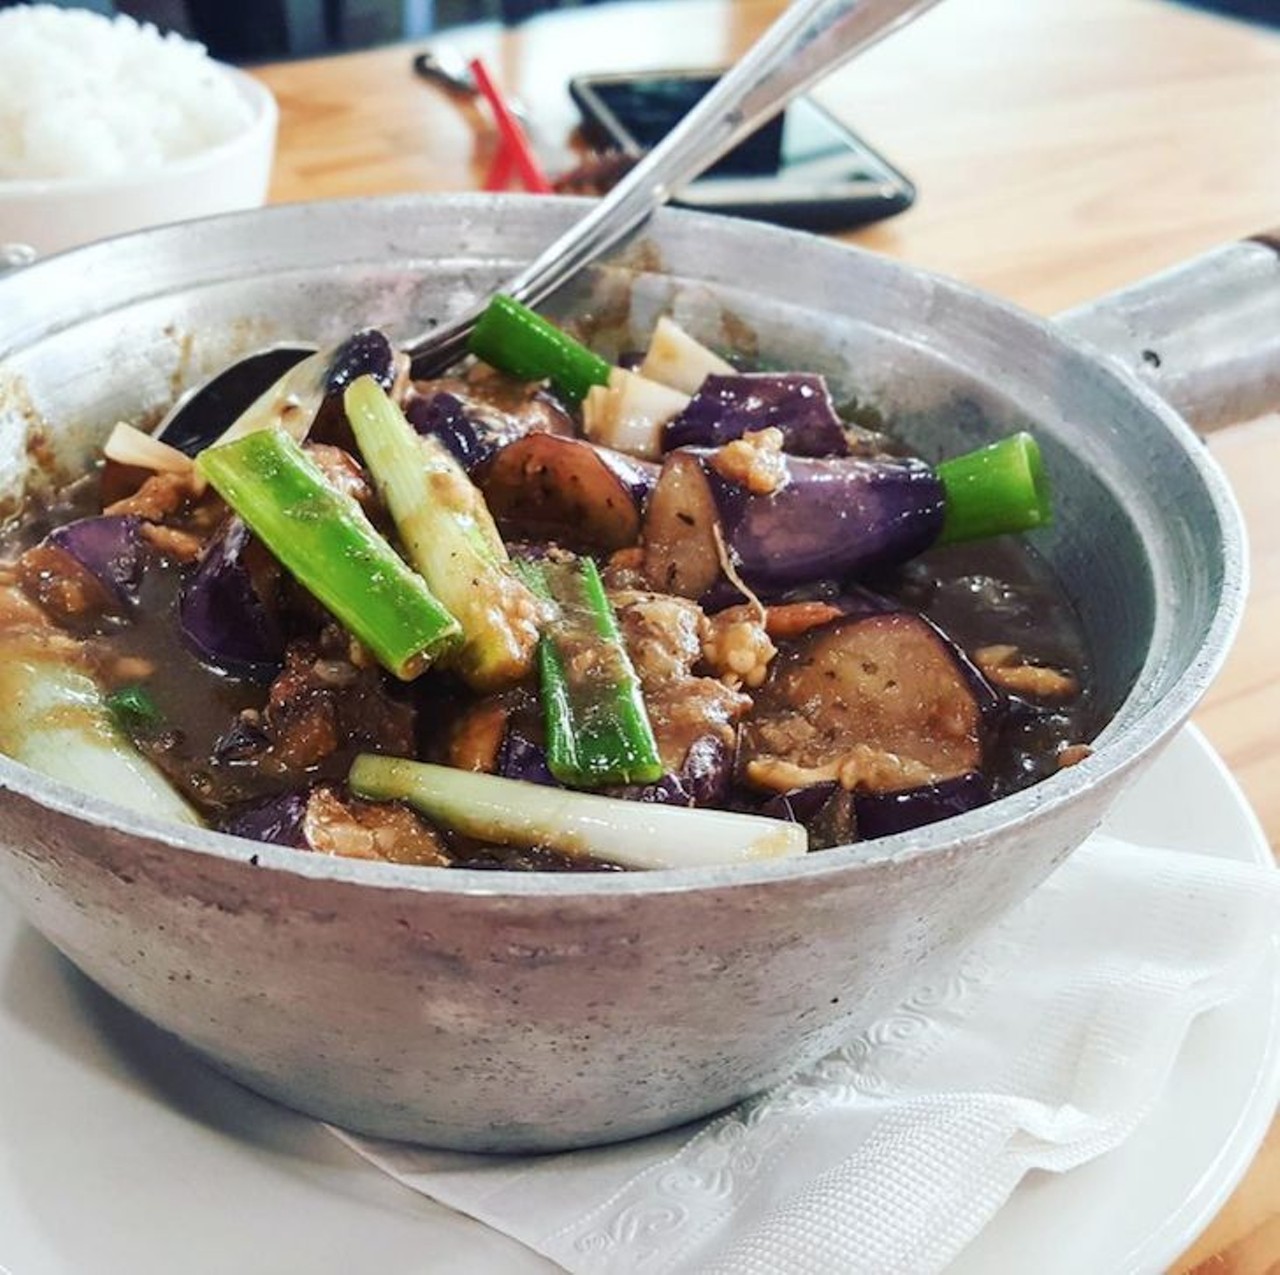 Check out their clay pot, packed with eggplant, salty fish and chicken. Served in a brown sauce along with some rice, and some crispy grains.
Photo via orlando.foodie/Instagram